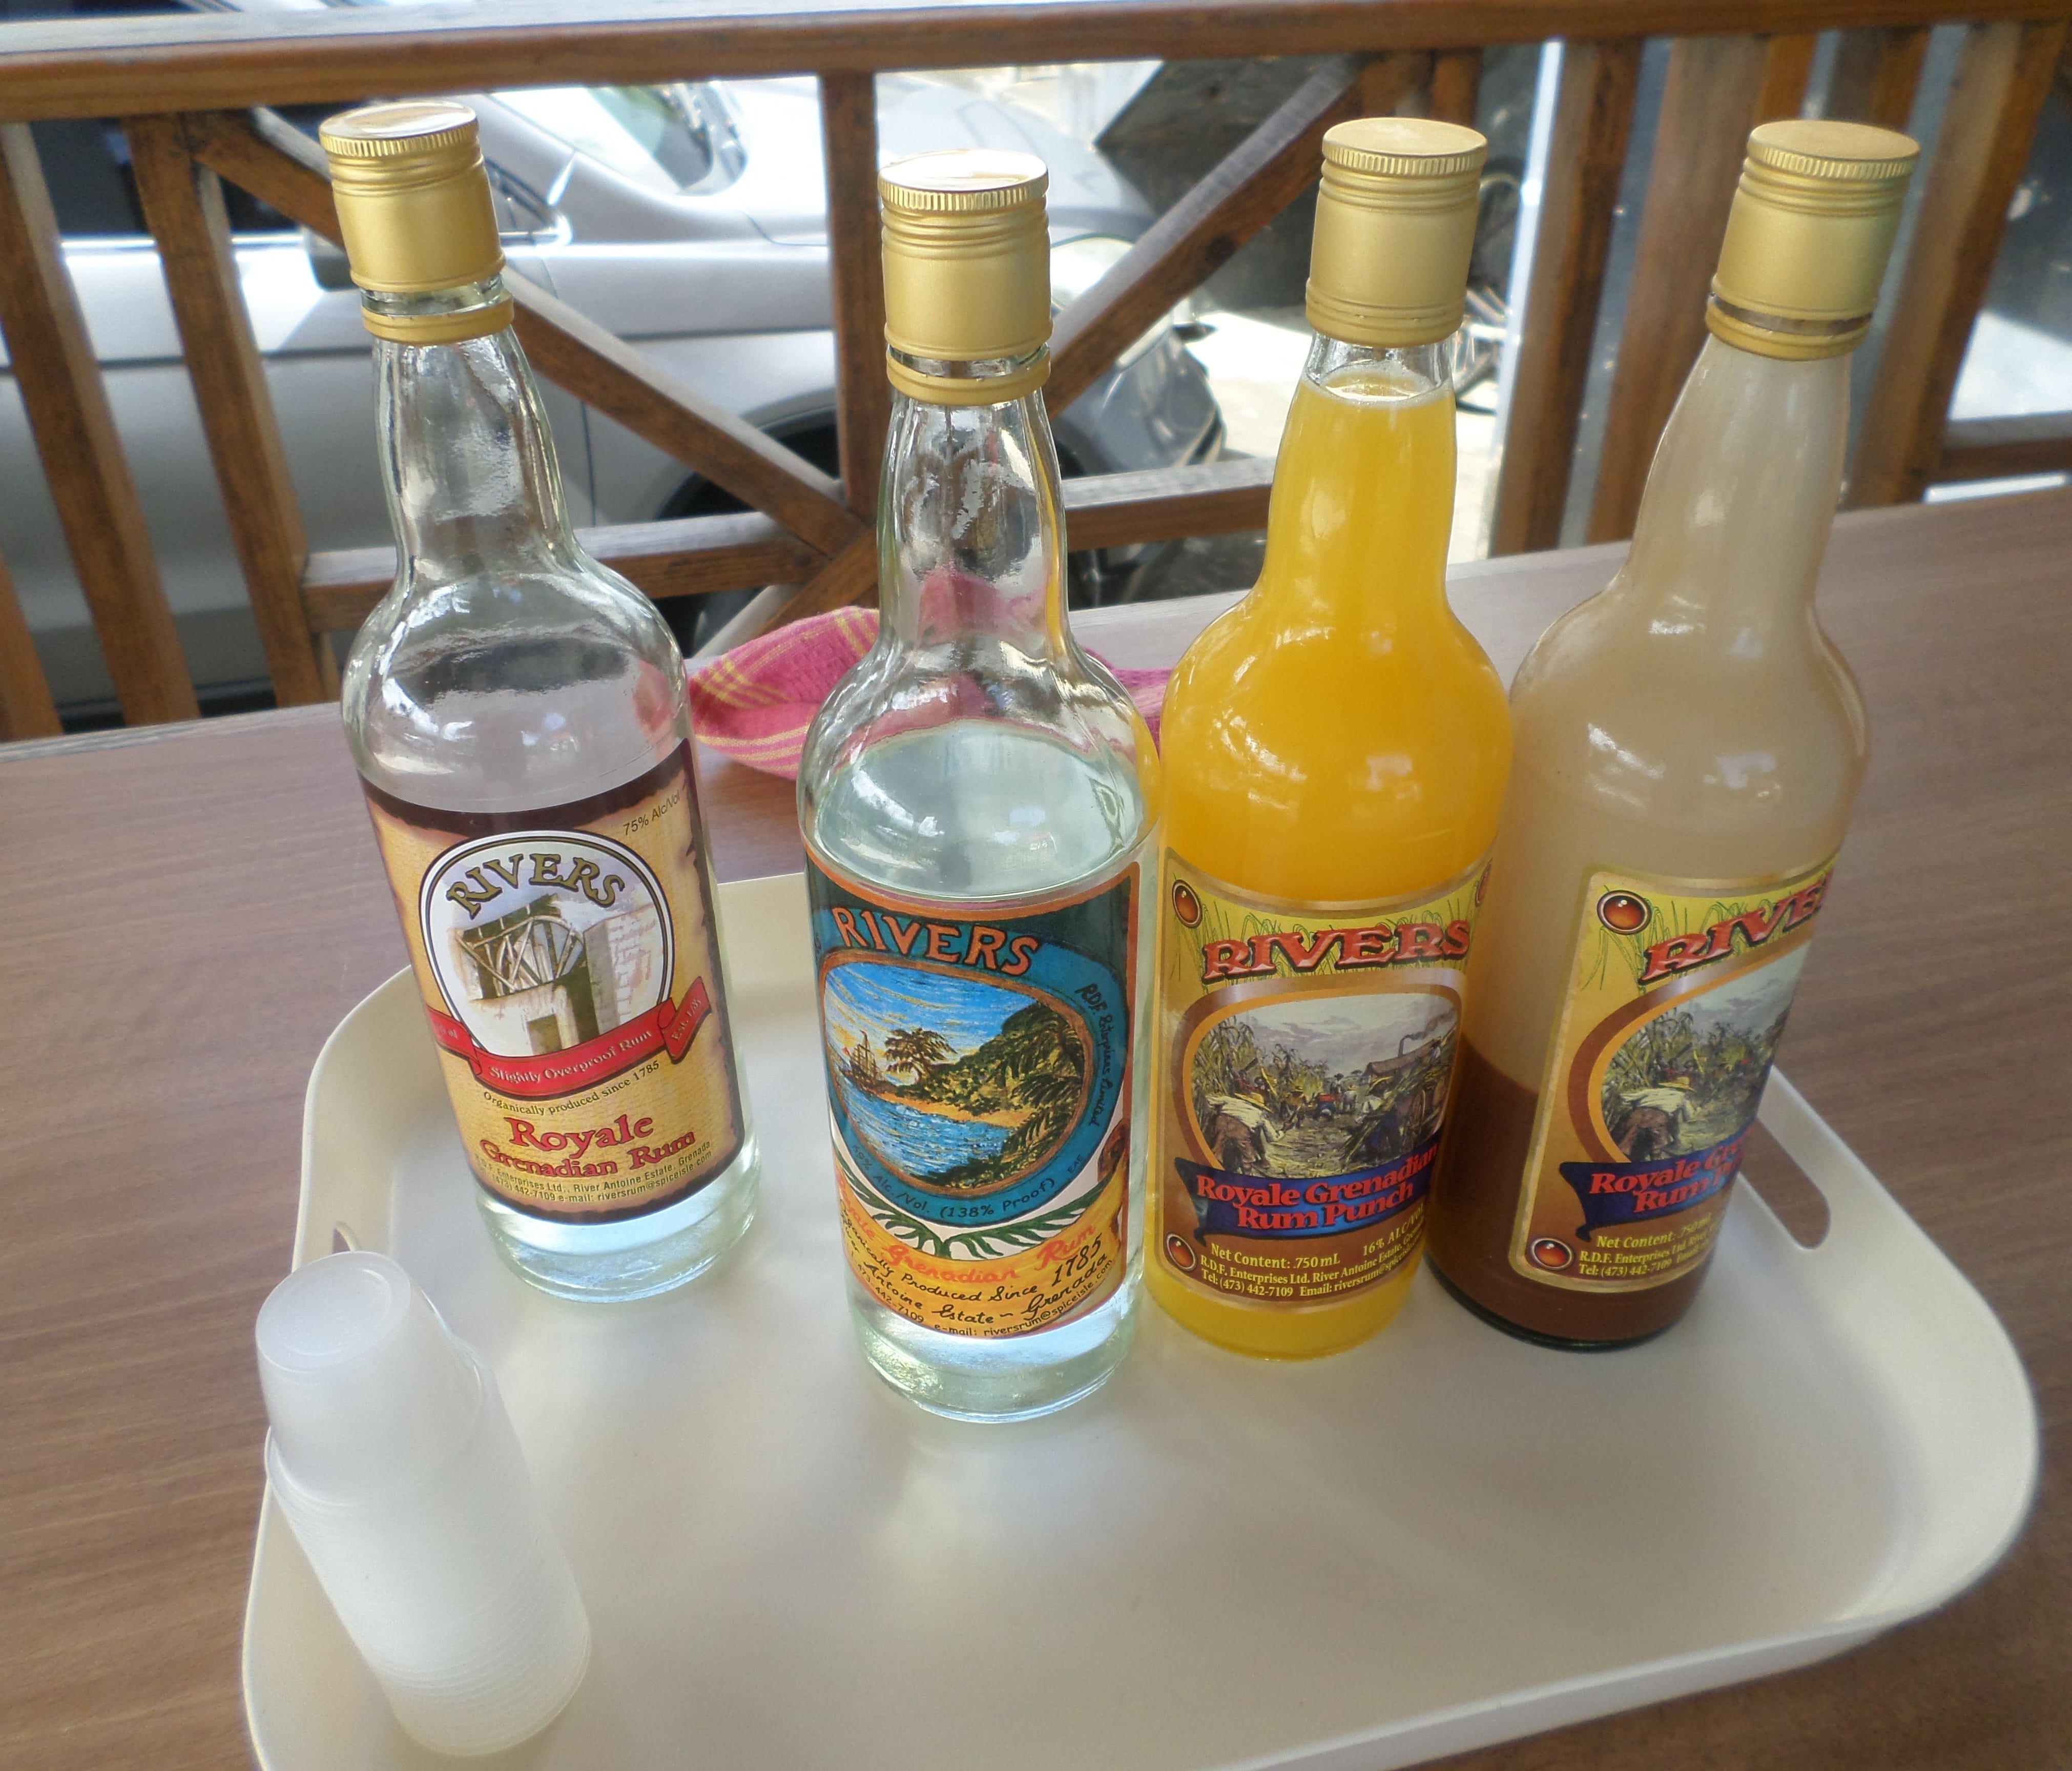 Like most rum tours, the one at River Antoine culminates in a tasting.